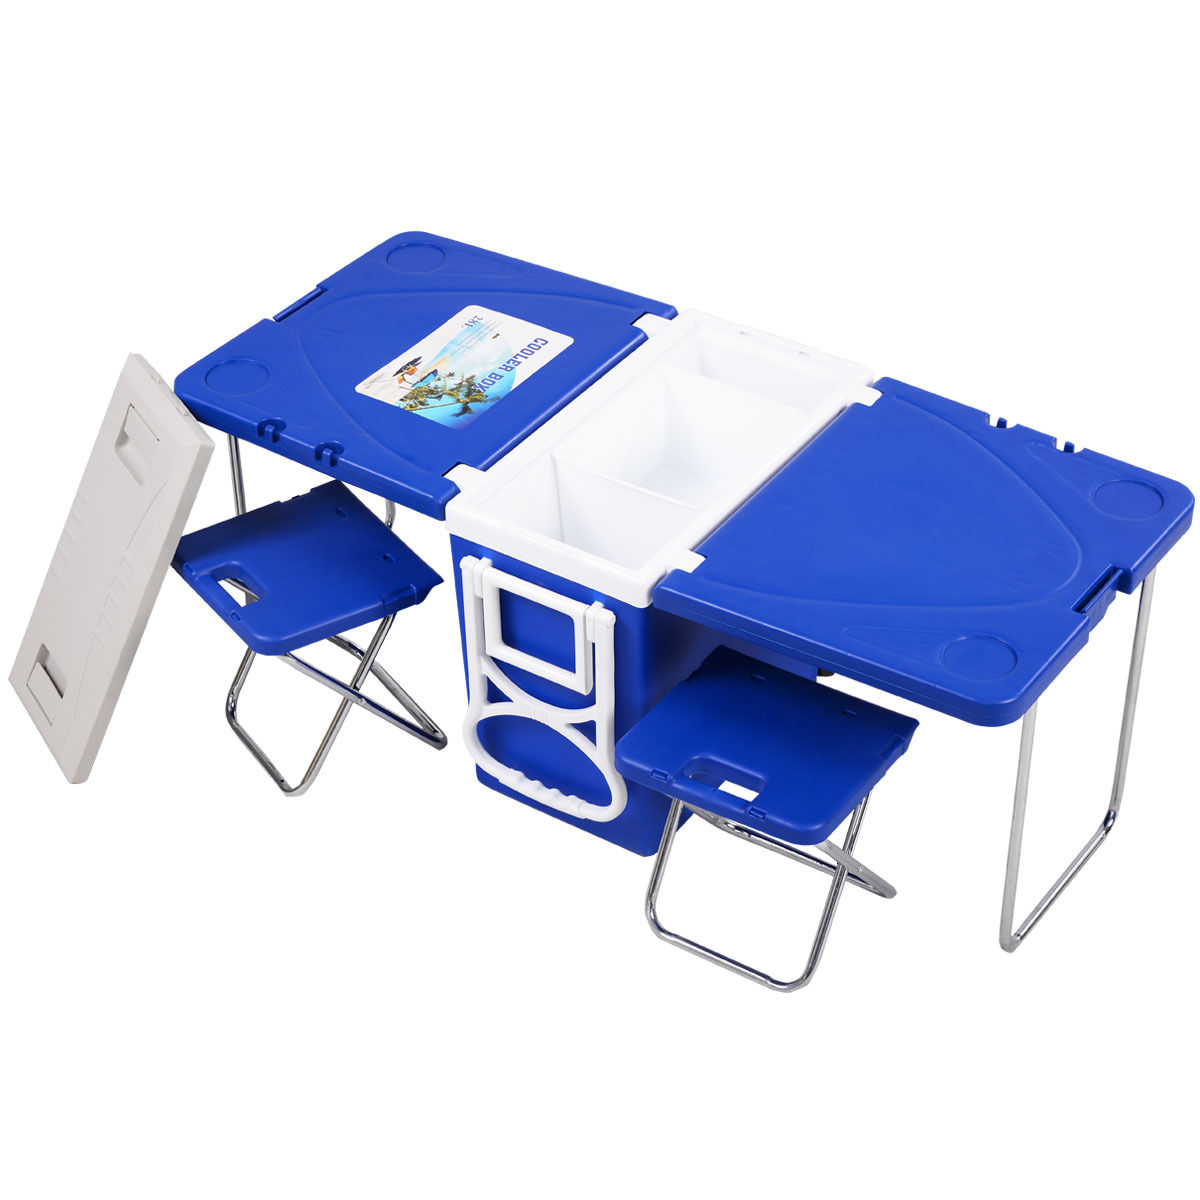 Cooler Picnic Table 2 Camping Chairs Multi-Functional Portable Wheeled Coolers 